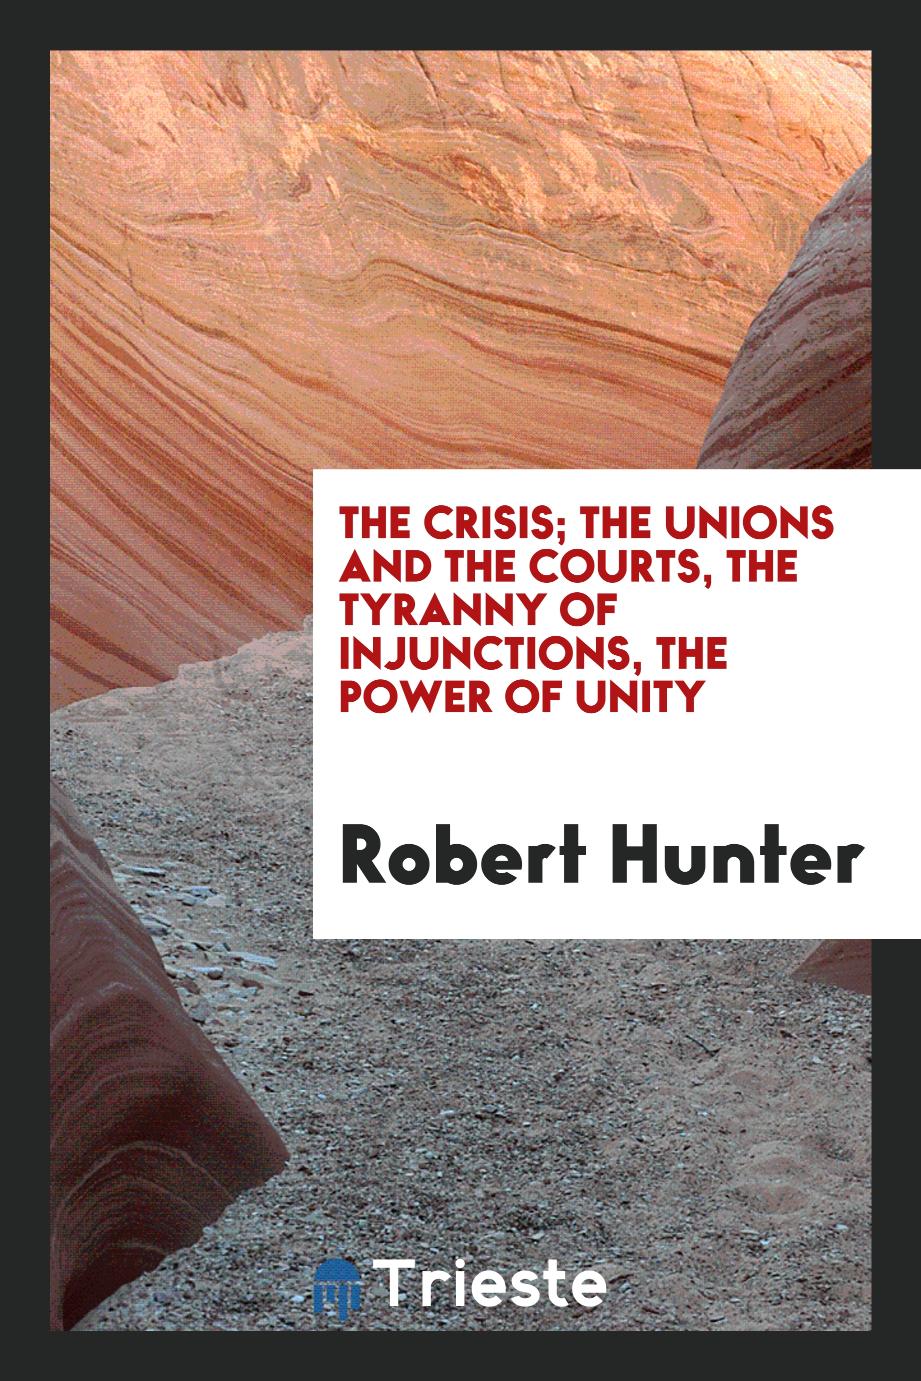 The crisis; the unions and the courts, the tyranny of injunctions, the power of unity